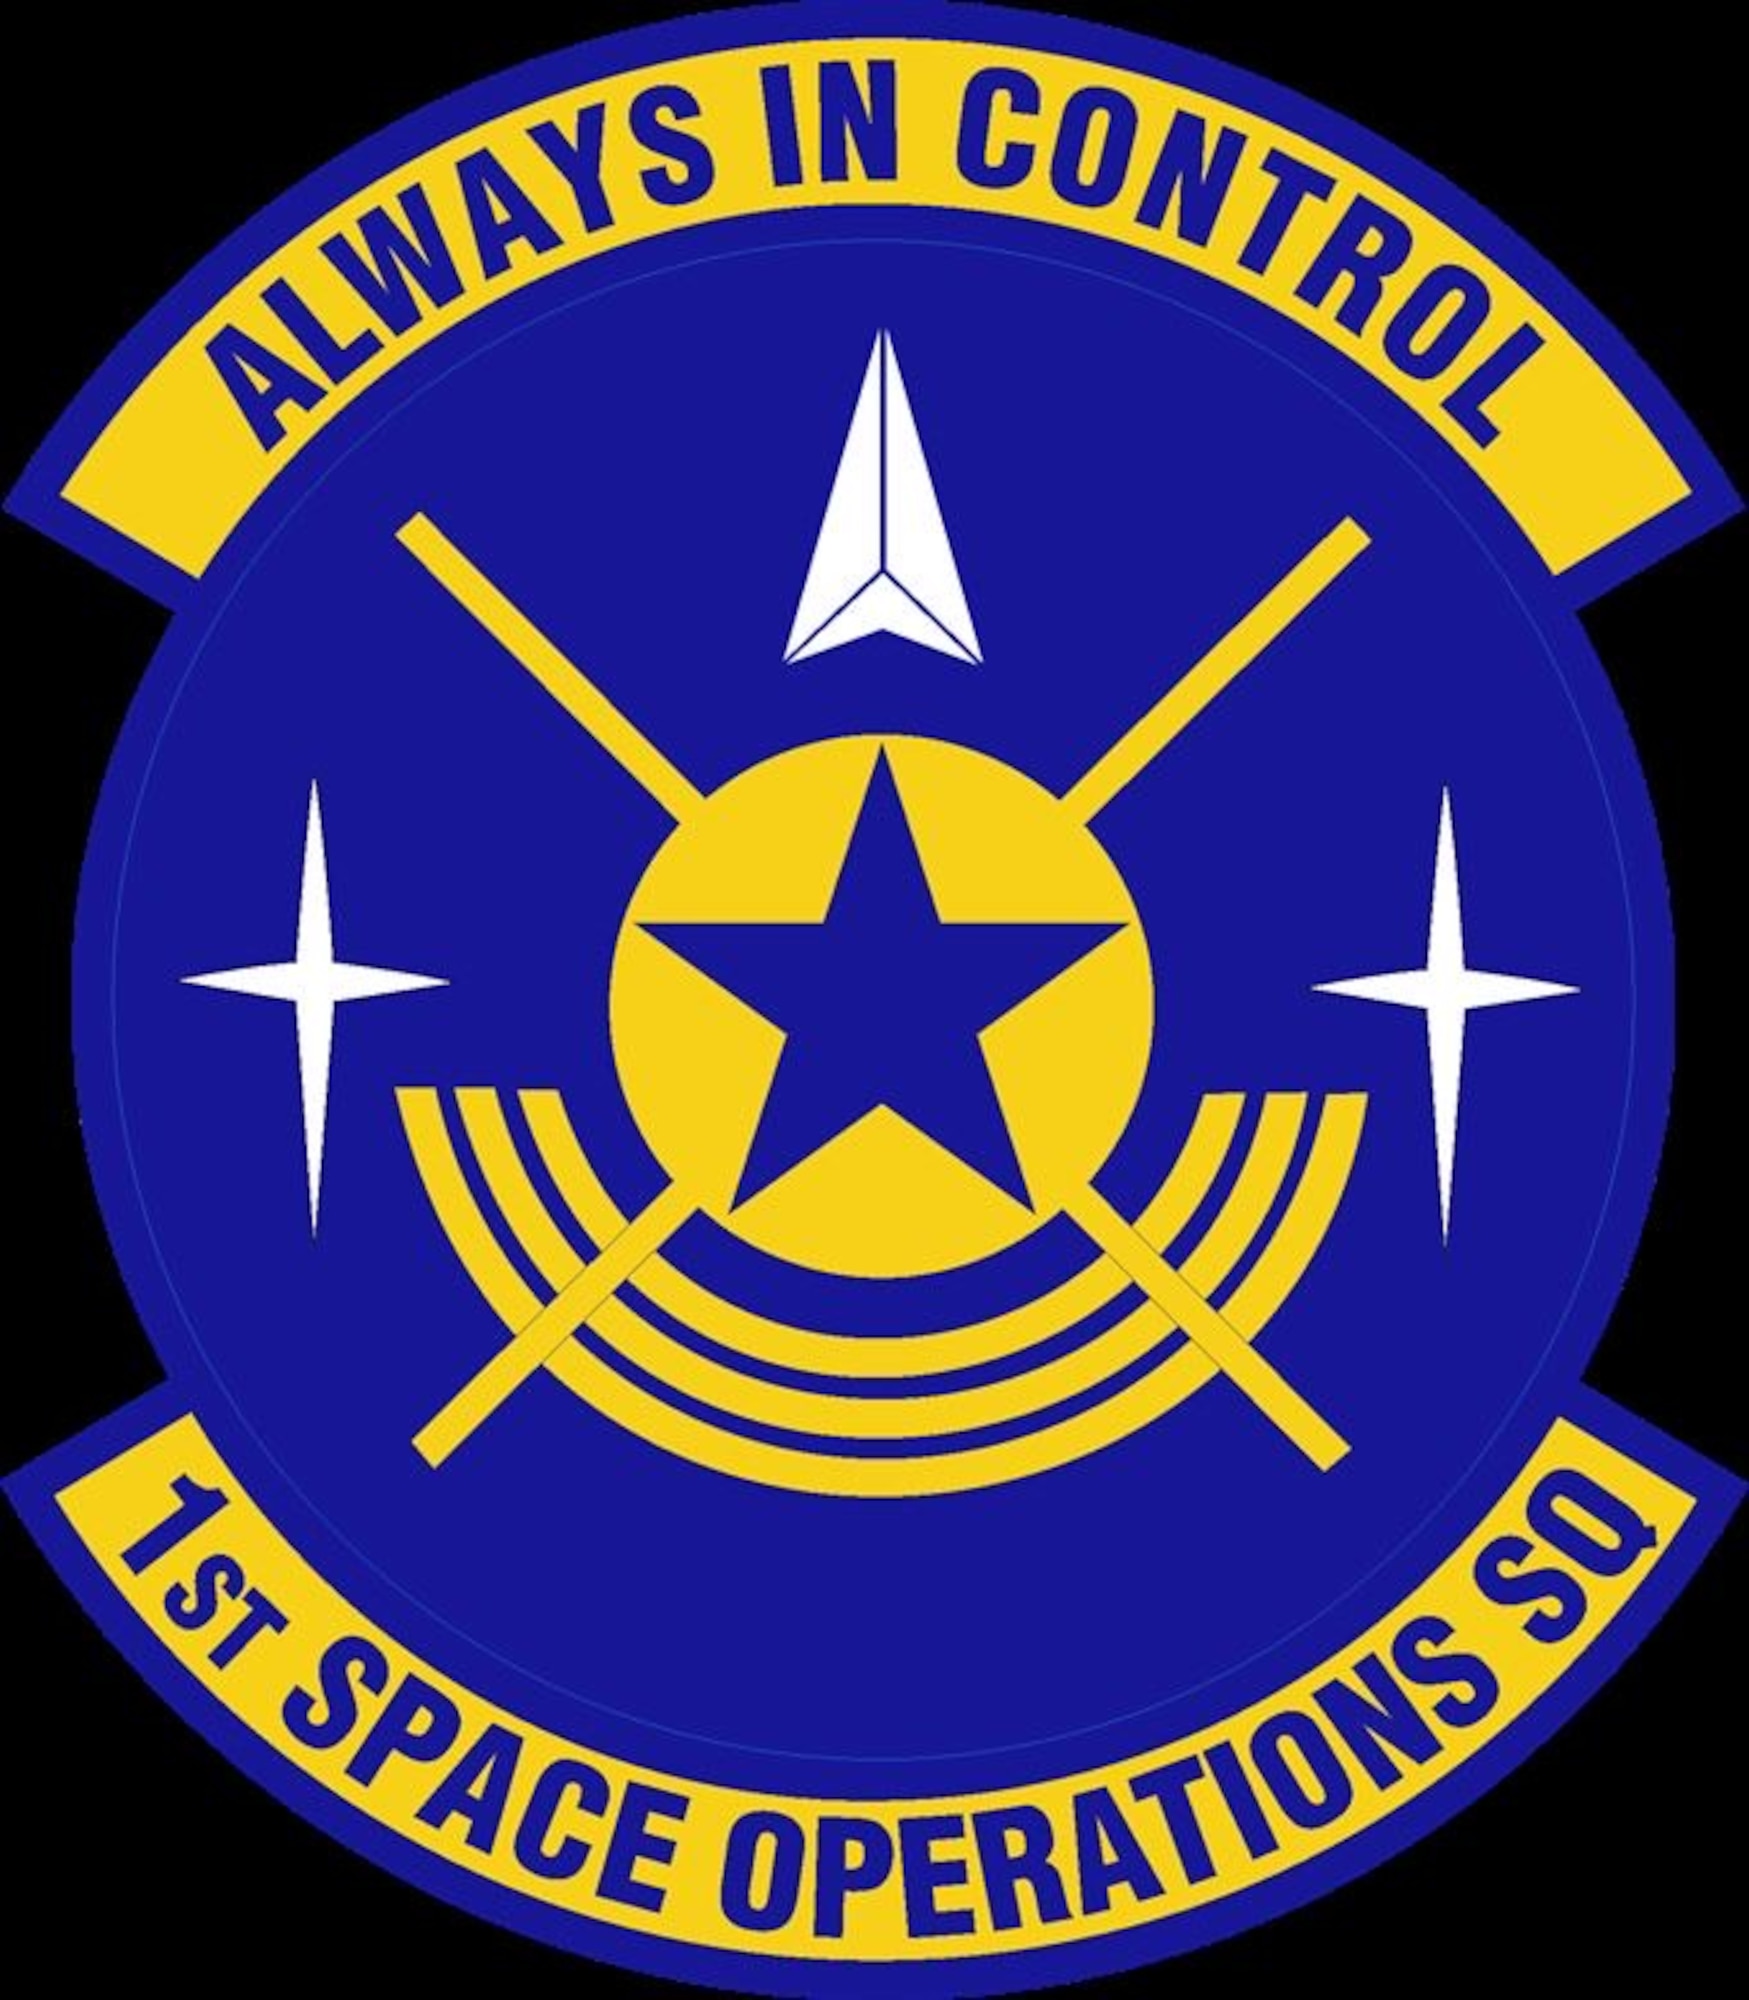 Both the 1st and 7th Space Operations Squadron leaders are scheduled to speak at a symposium in March after being recognized by Headquarter Air Force/Defense Strategies Institute. Both units will share their experiences how to improve. (Courtesy photo)